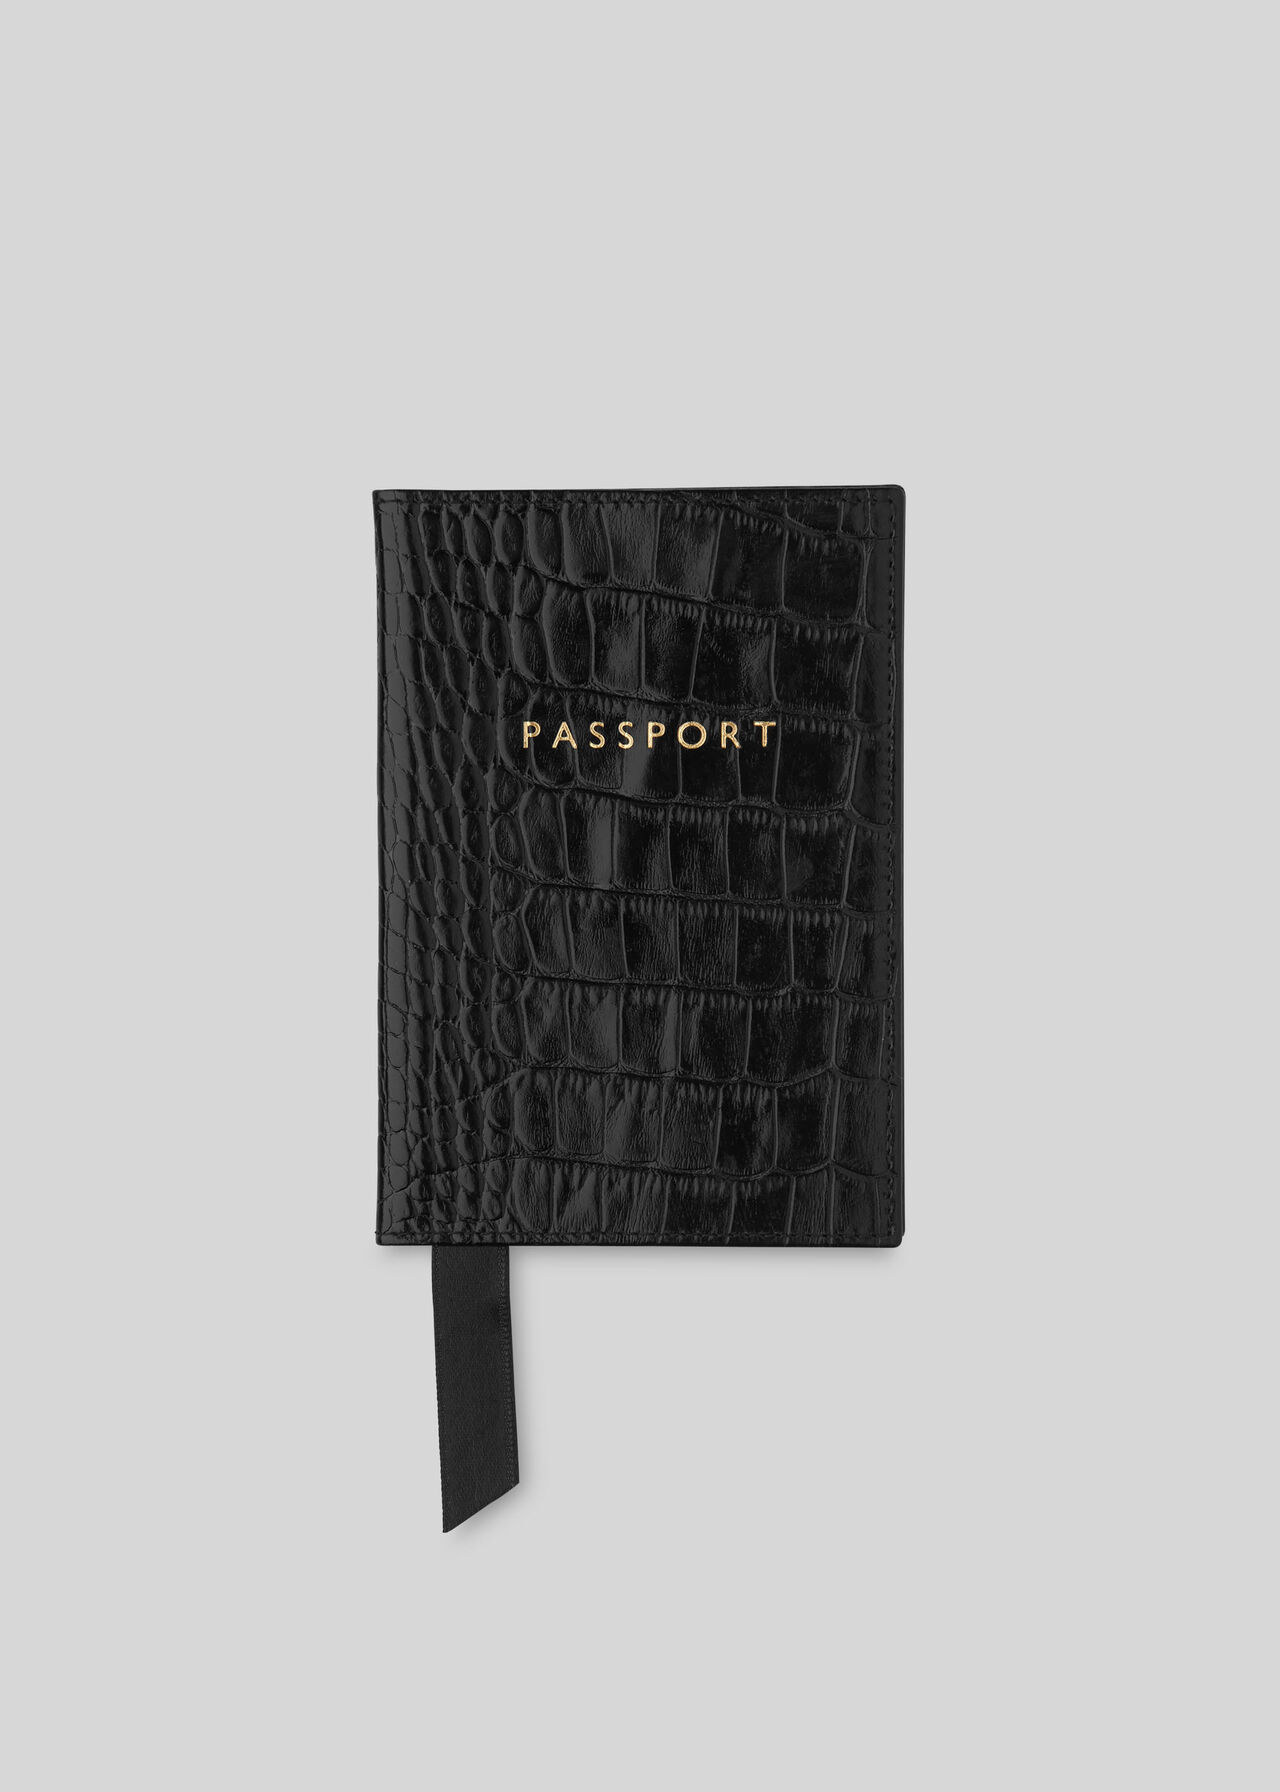 Leather Passport Cover India; Leather Passport Holder in Croco Black